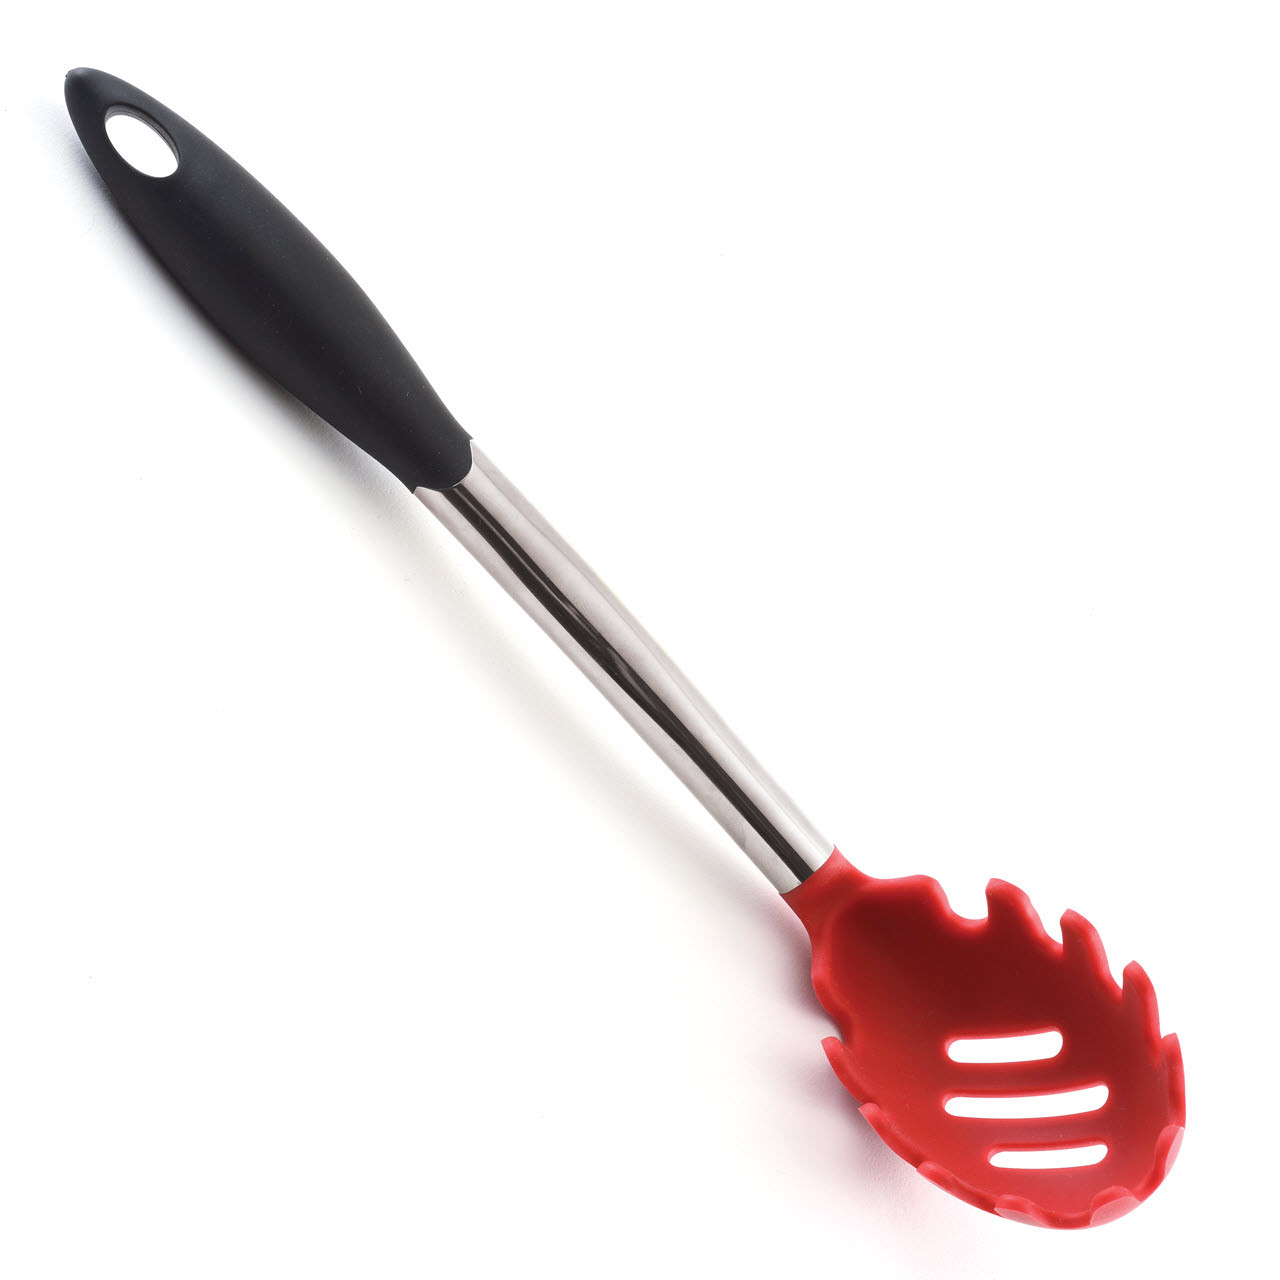 https://cdn11.bigcommerce.com/s-21kj3ntgv1/images/stencil/1280x1280/products/369/1242/Grip-EZ-Pasta-Server-Silicone-and-Stainless-Steel__31730.1603828441.jpg?c=2